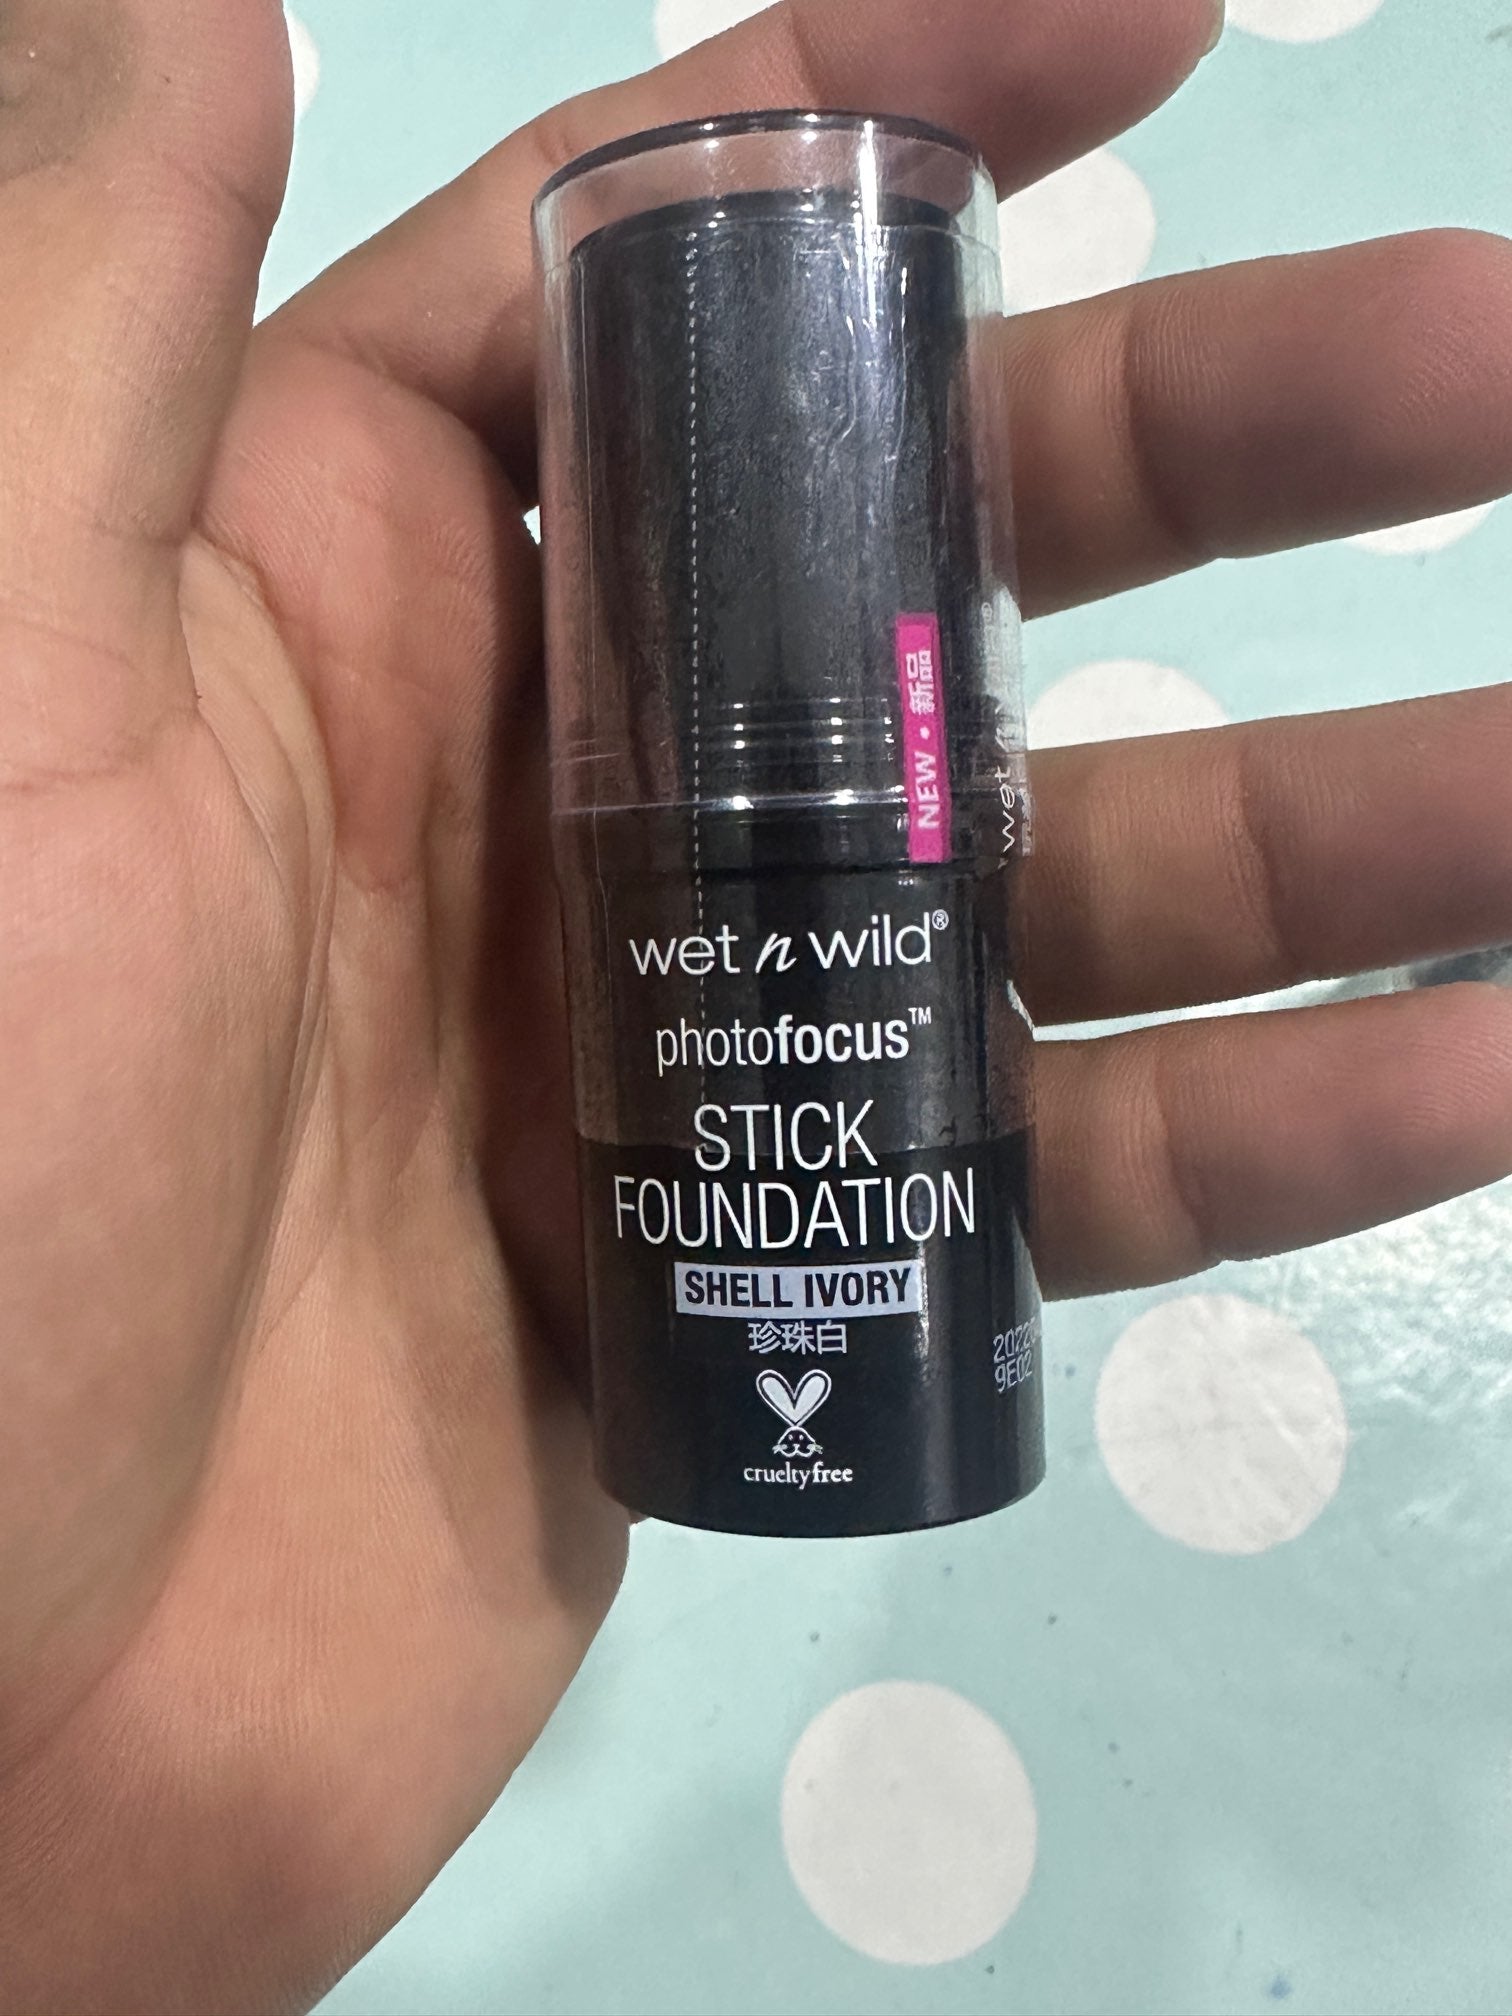 Lot imported foundation and foundation stick and strobe stick